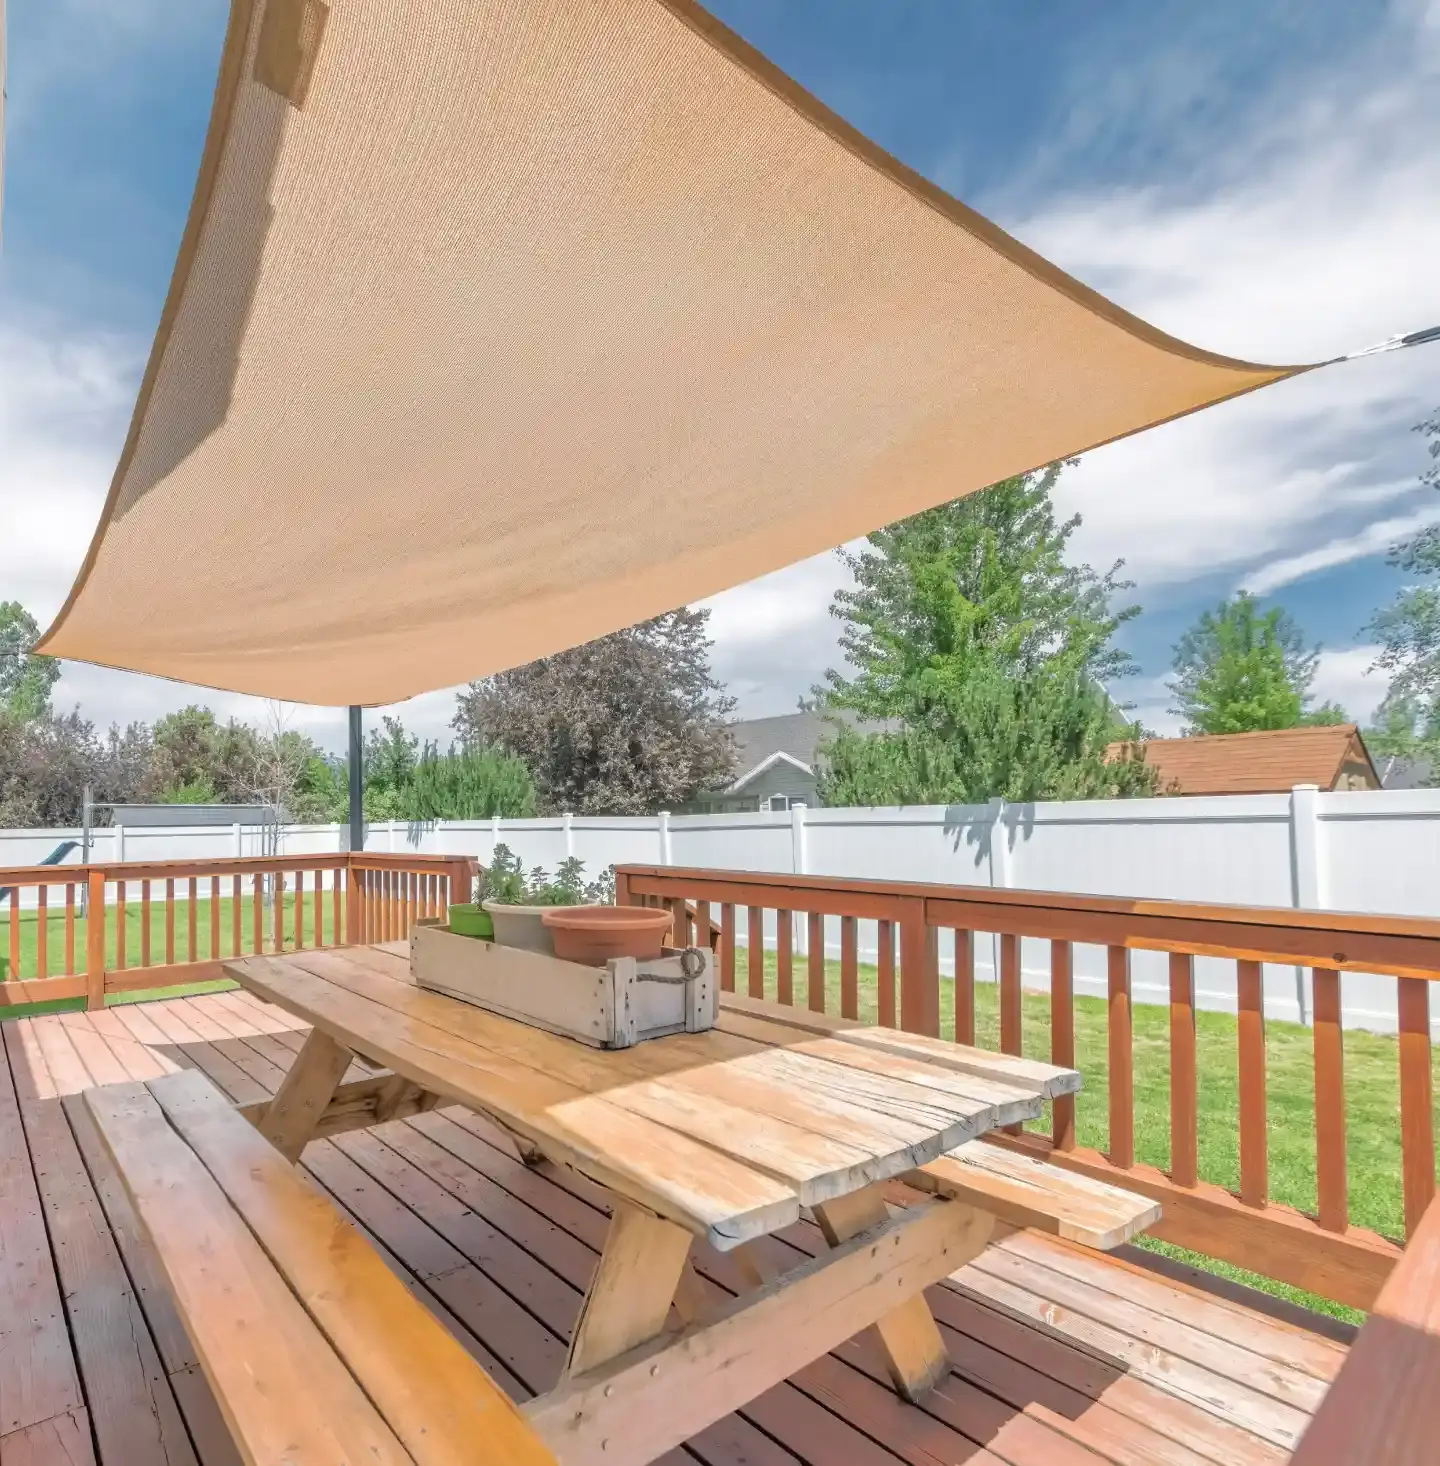 Twister Sail installed to cover an outdoor patio with a picnic table.